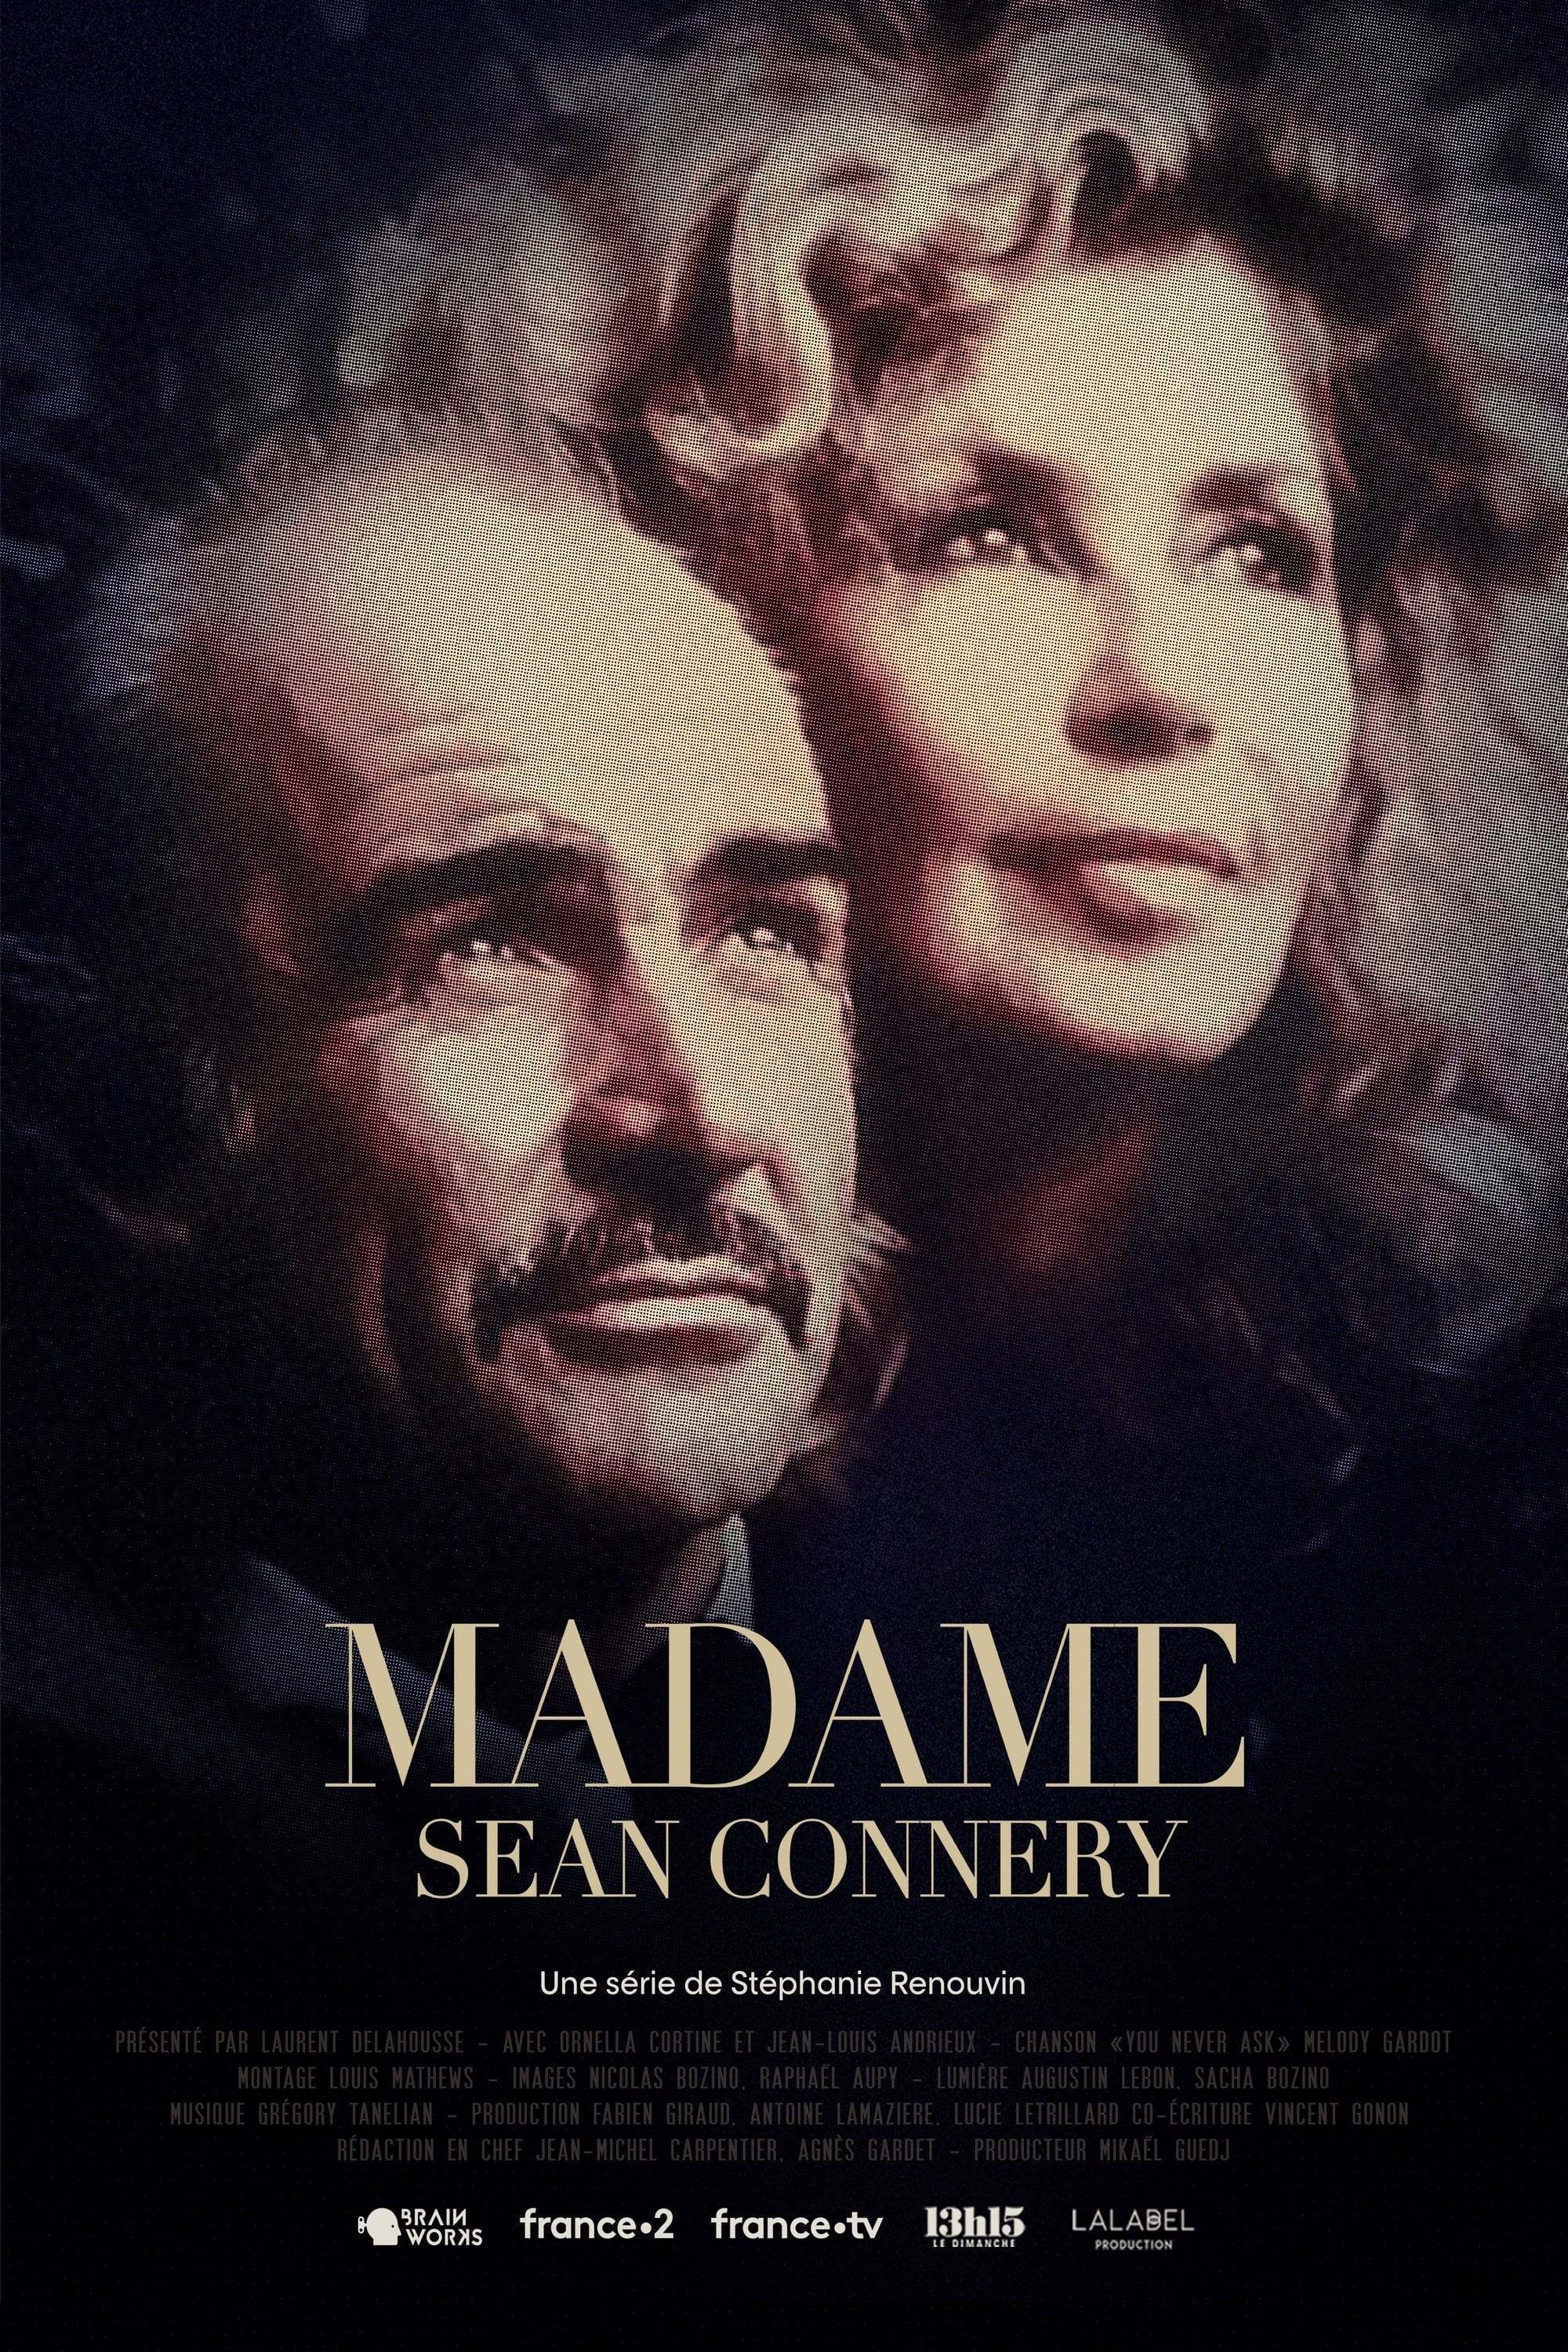 Mme Sean Connery